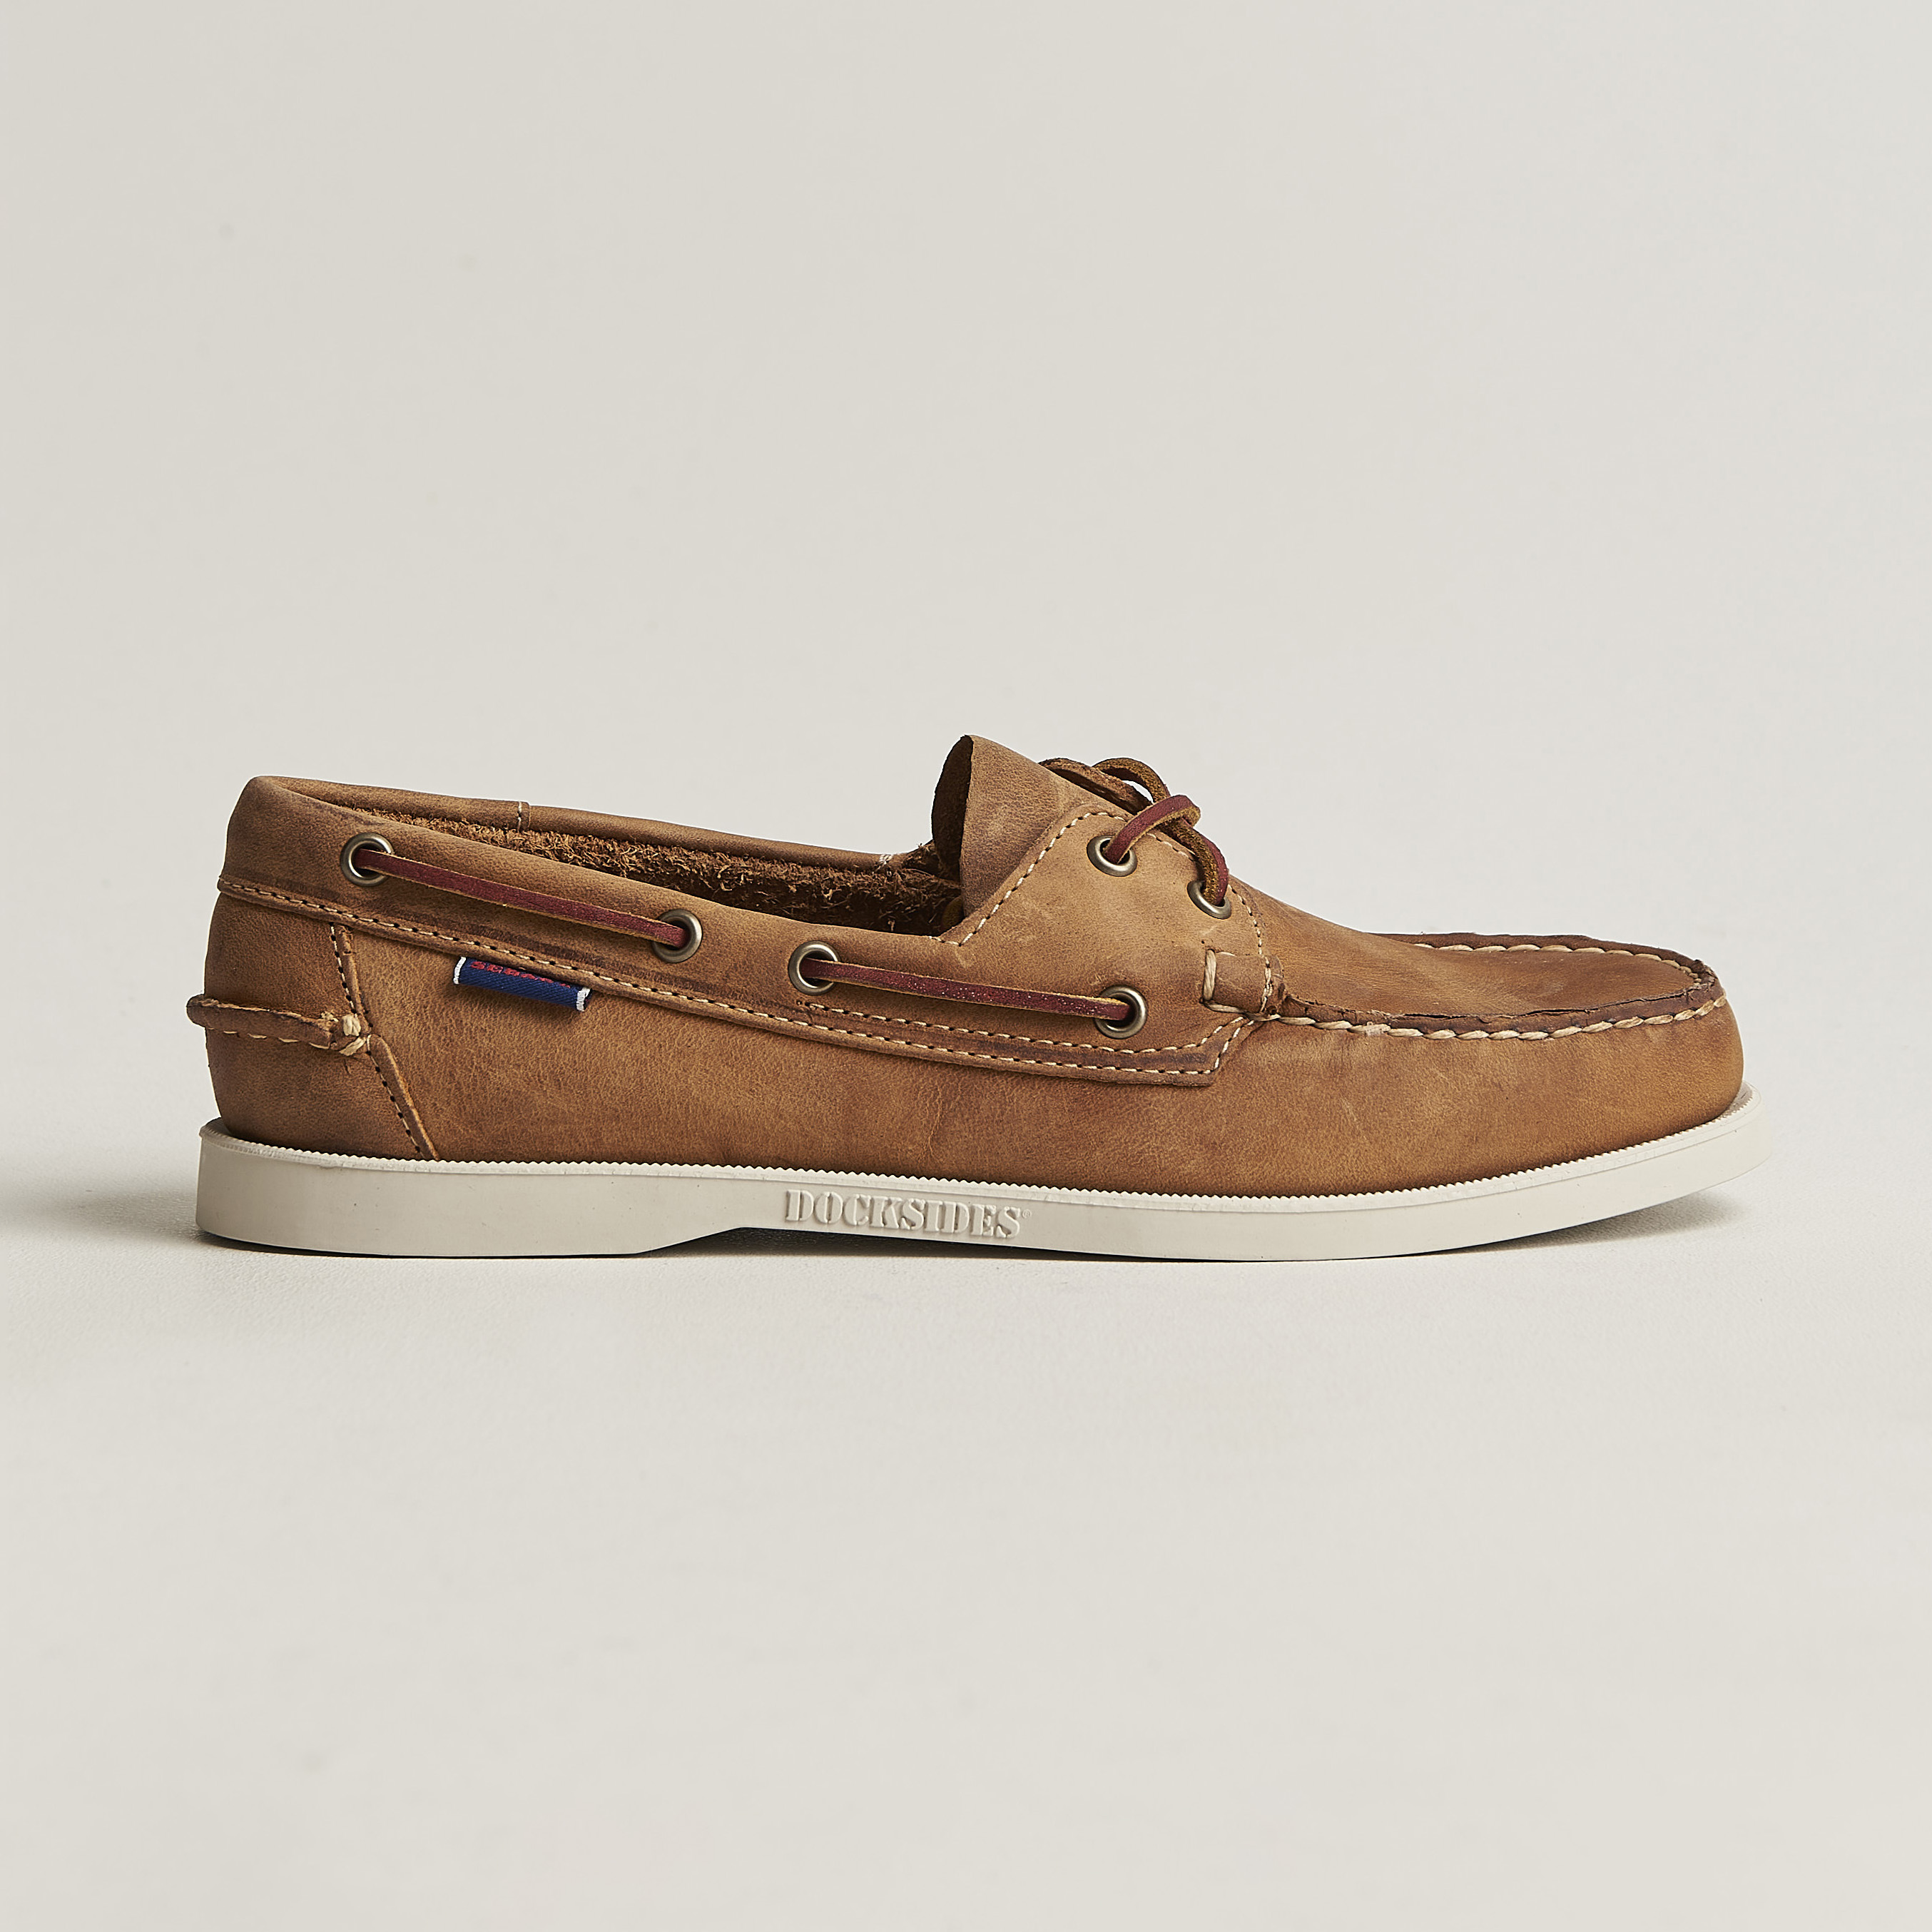 Men's boat shoes: how to wear them this summer? – Melvin & Hamilton